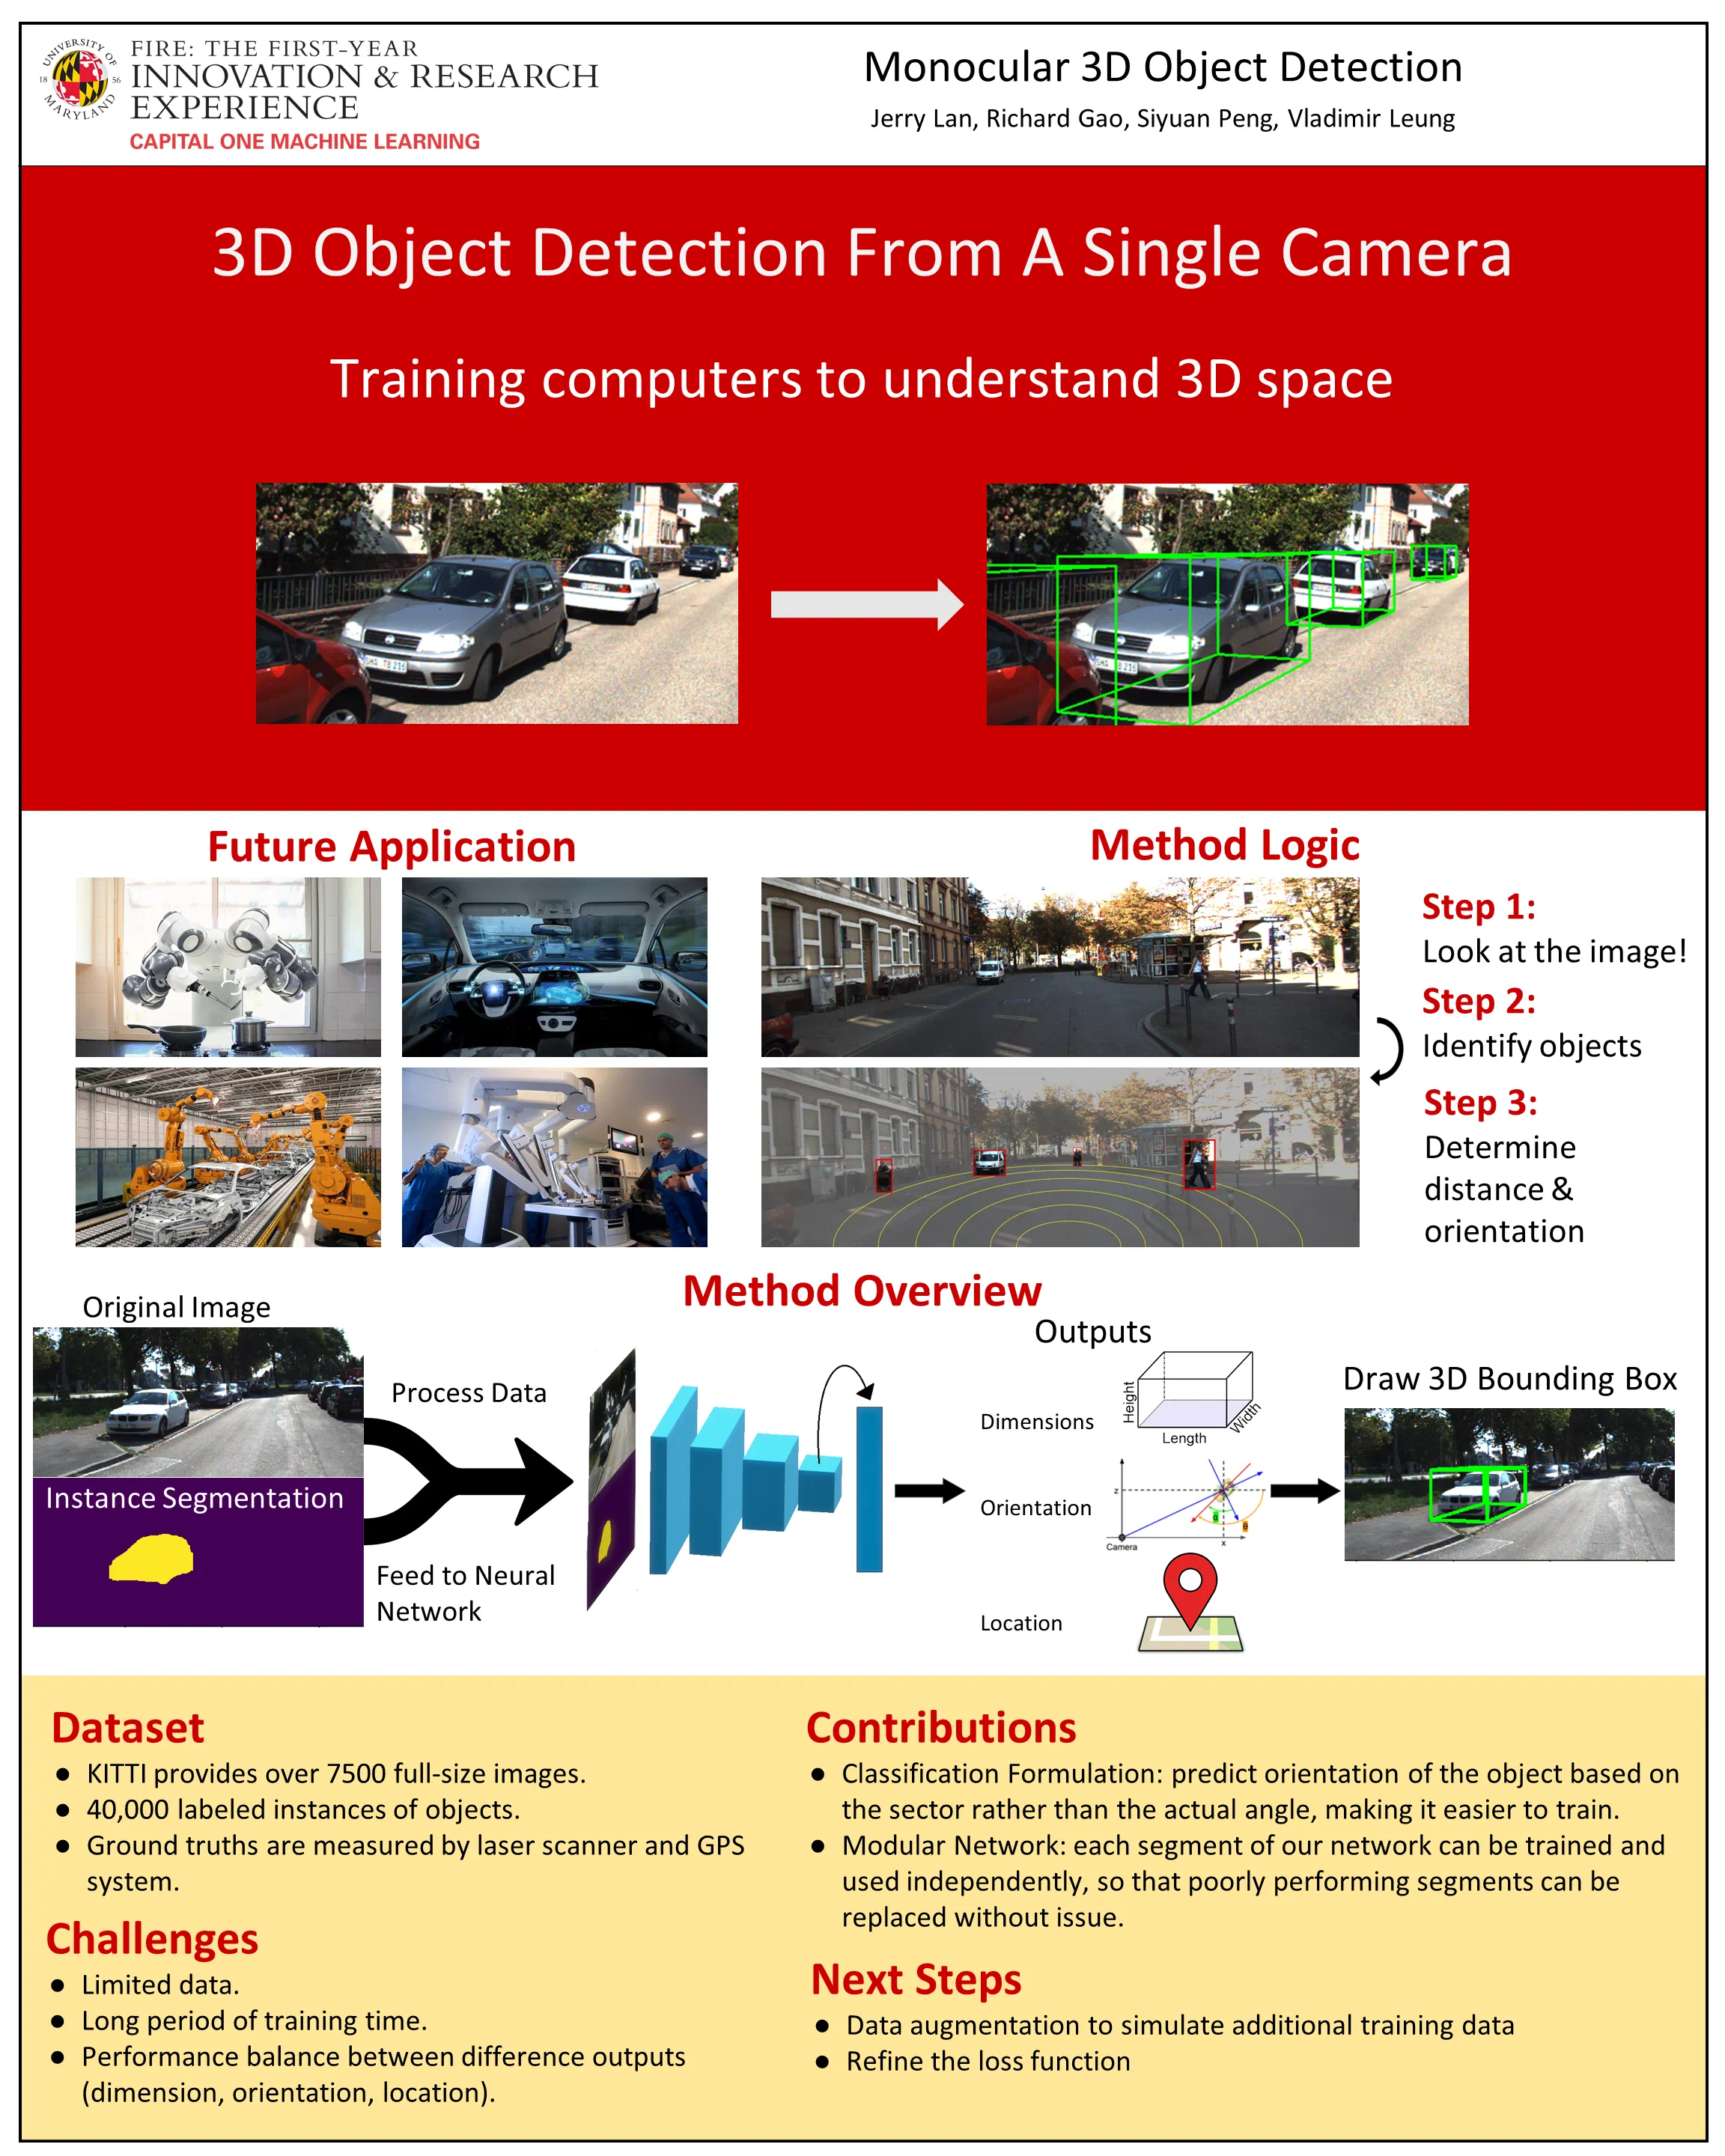 3D Object Detection and Localization